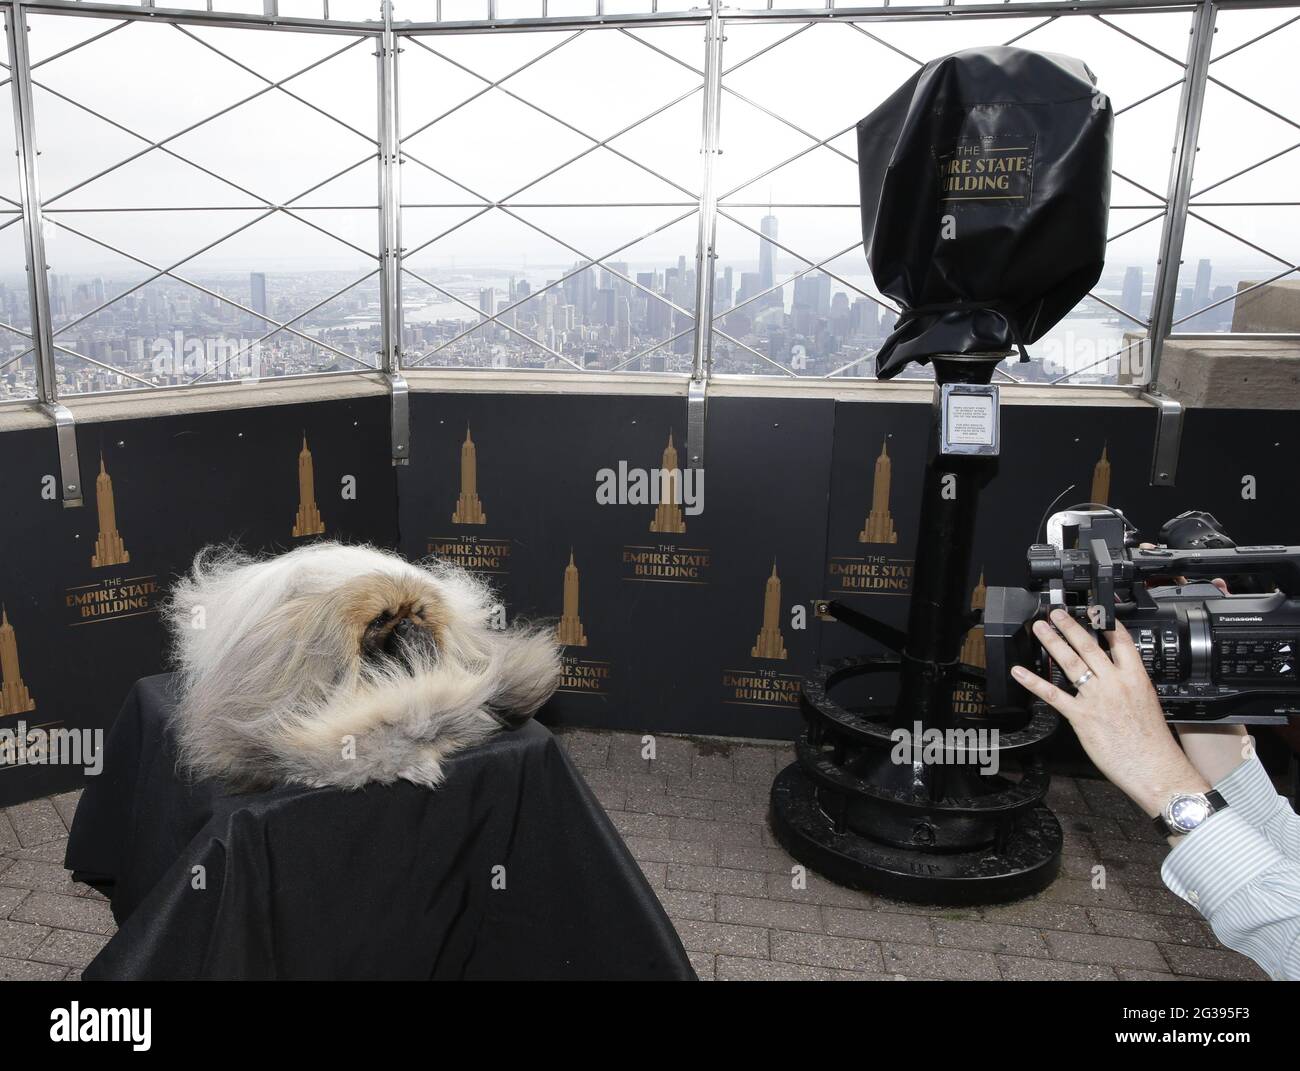 New York, United States. 14th June, 2021. Wasabi the Pekingese visits the top of the Empire State Building after winning Best In Show the day before at the 145th annual Westminster Kennel Club Dog Show in New York City on Monday, June 14, 2021. This years Westminster Dog Show was delayed due to COVID-19 and next years competition will return again to Madison Square Garden. Photo by John Angelillo/UPI Credit: UPI/Alamy Live News Stock Photo